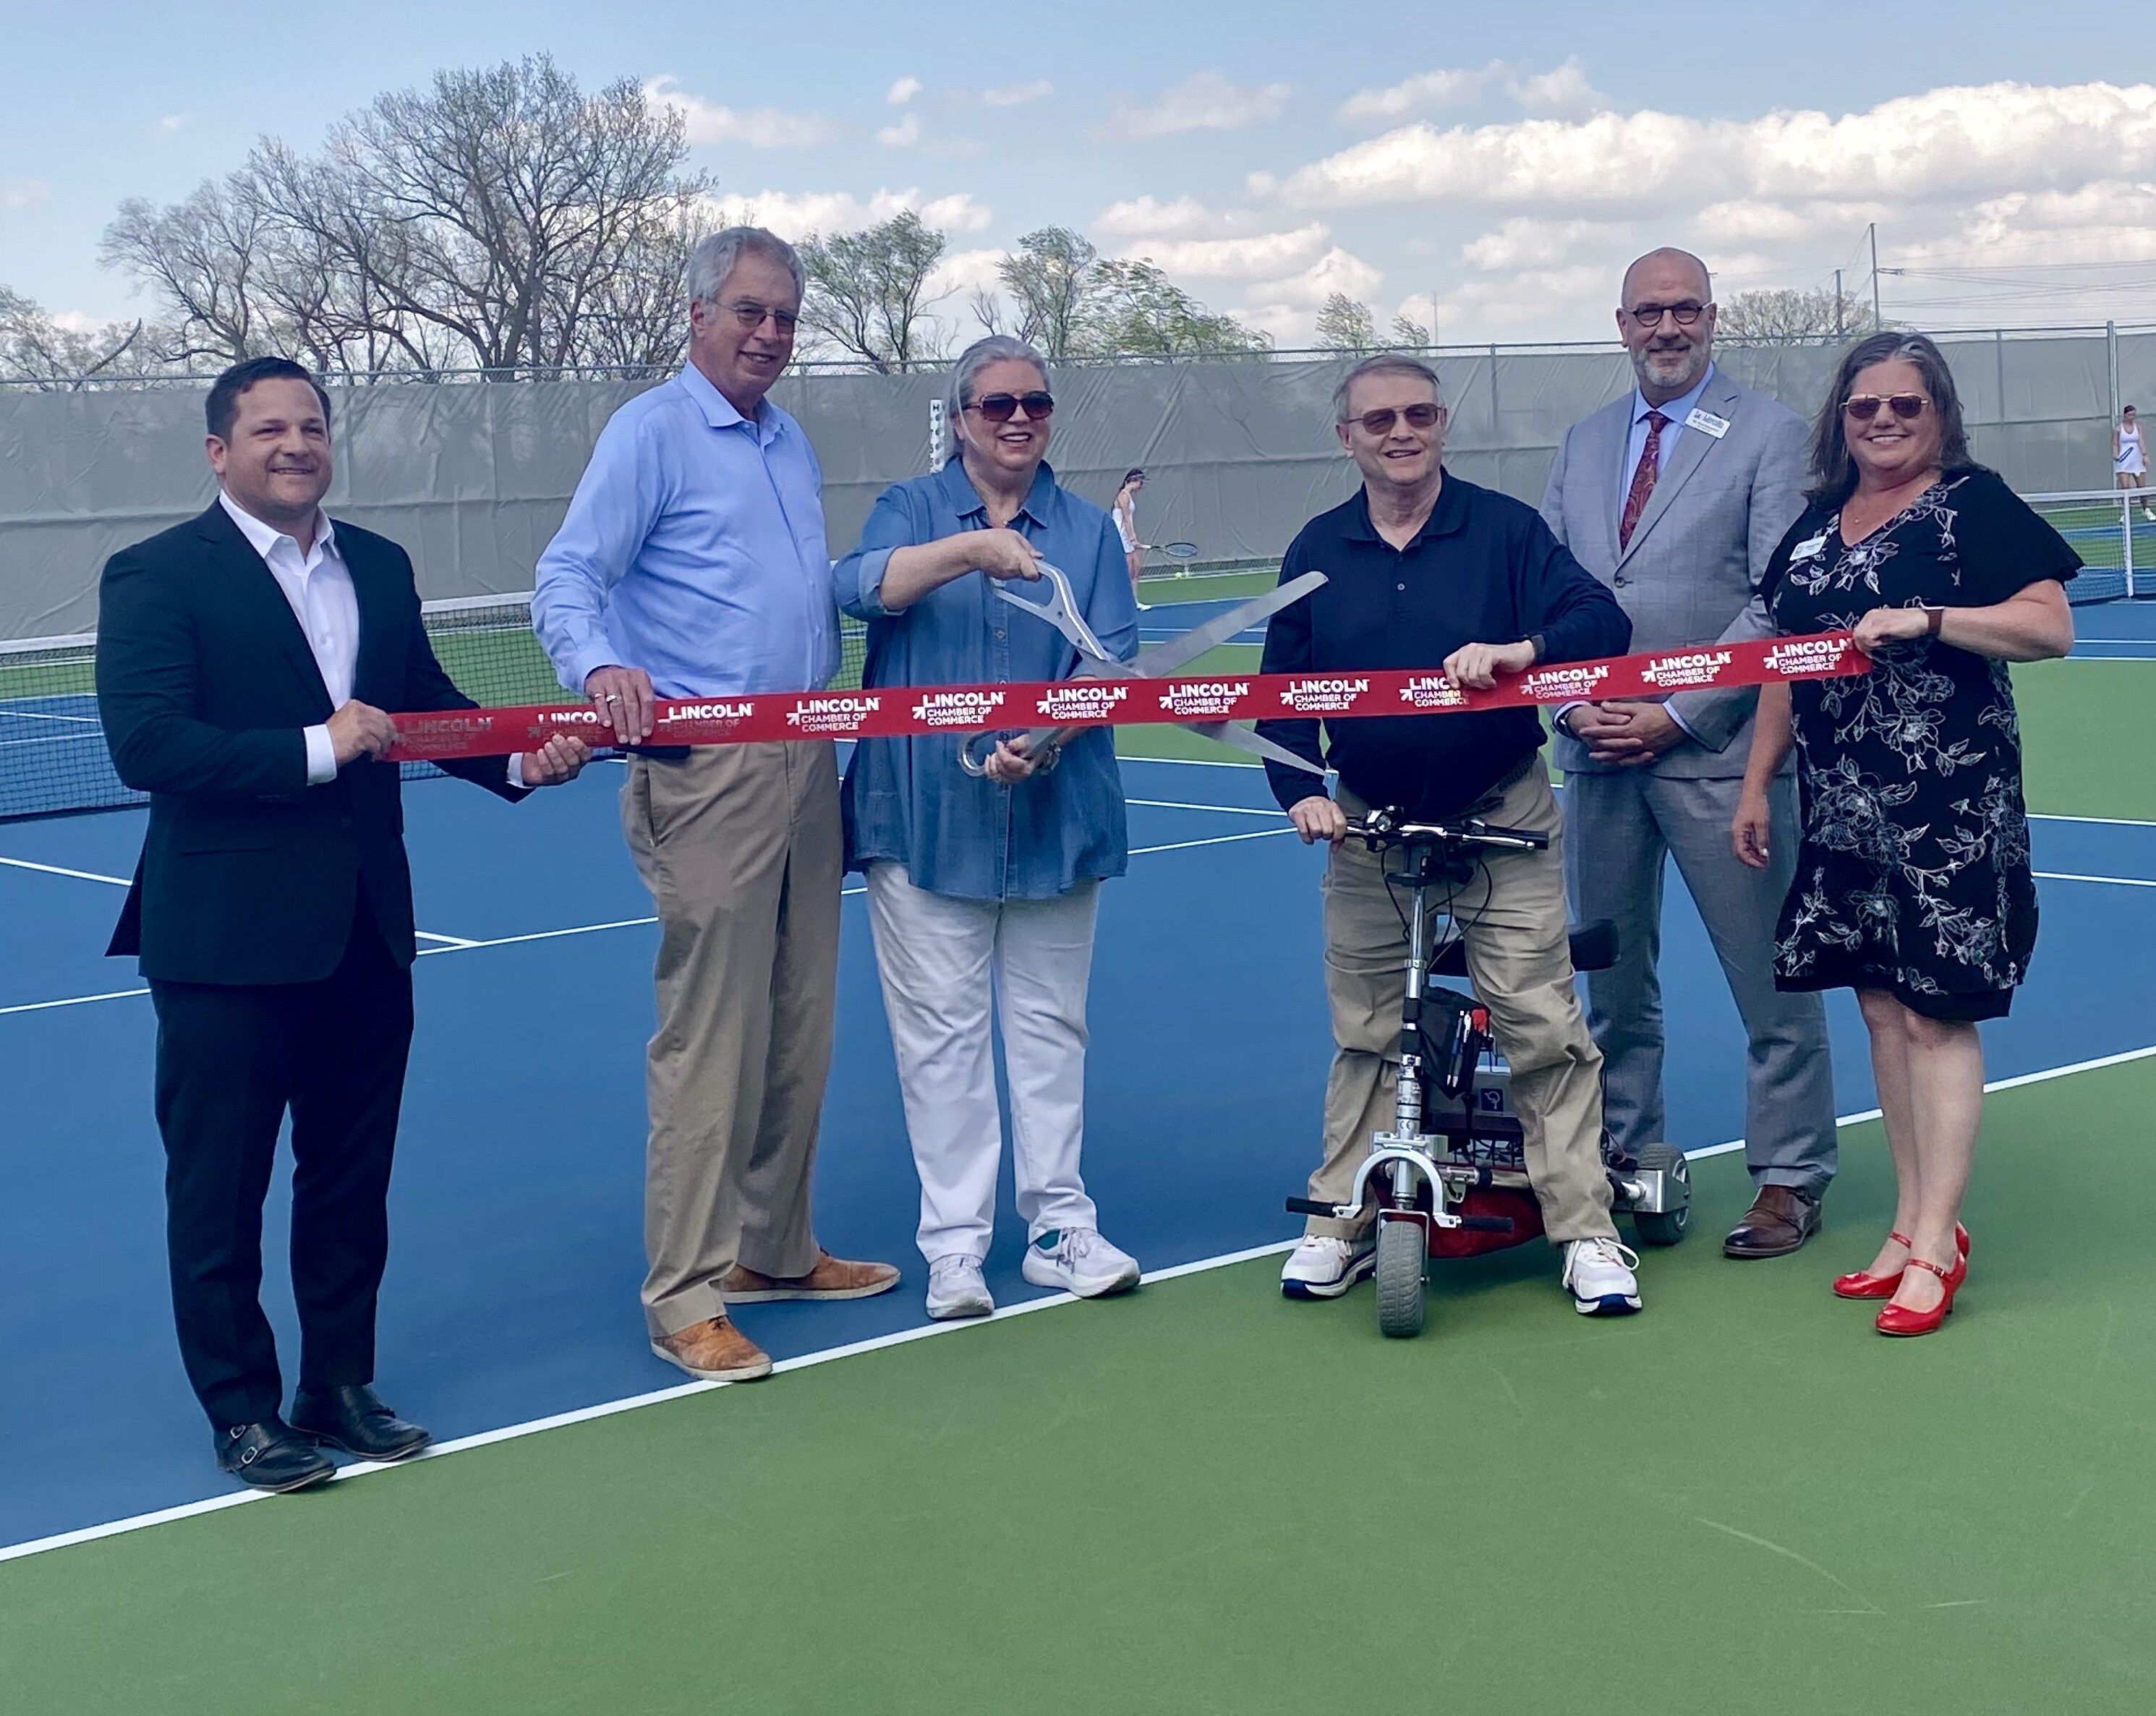 April Mission Moment: U-Stop Tennis Complex Serves Up a New Era for Tennis in Lincoln